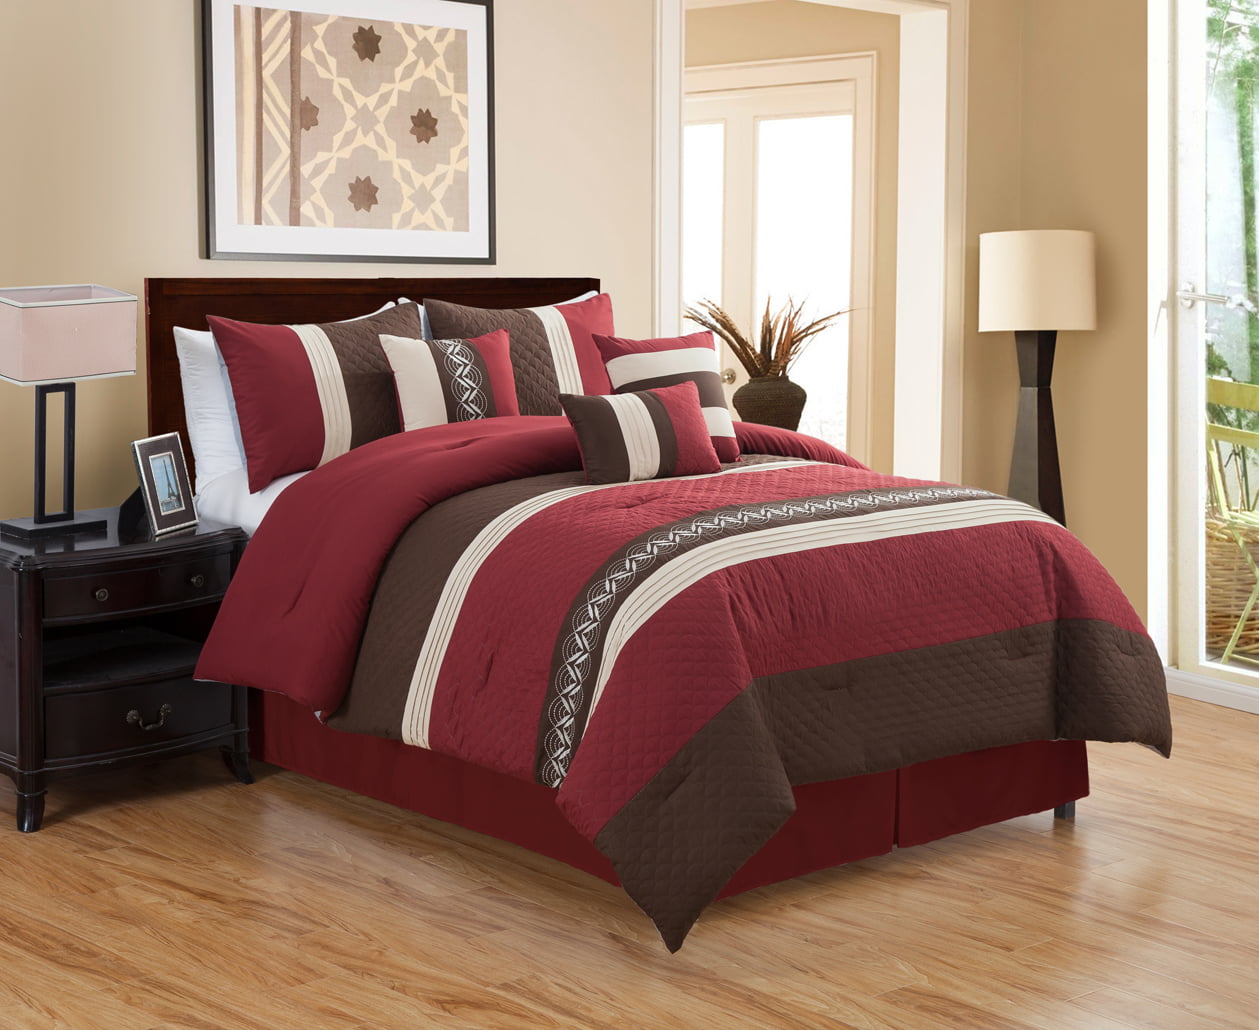 Unique Home Michri 7 Piece Comforter Set Striped Brown and Red Bed In a Bag Clearance Bedding ...